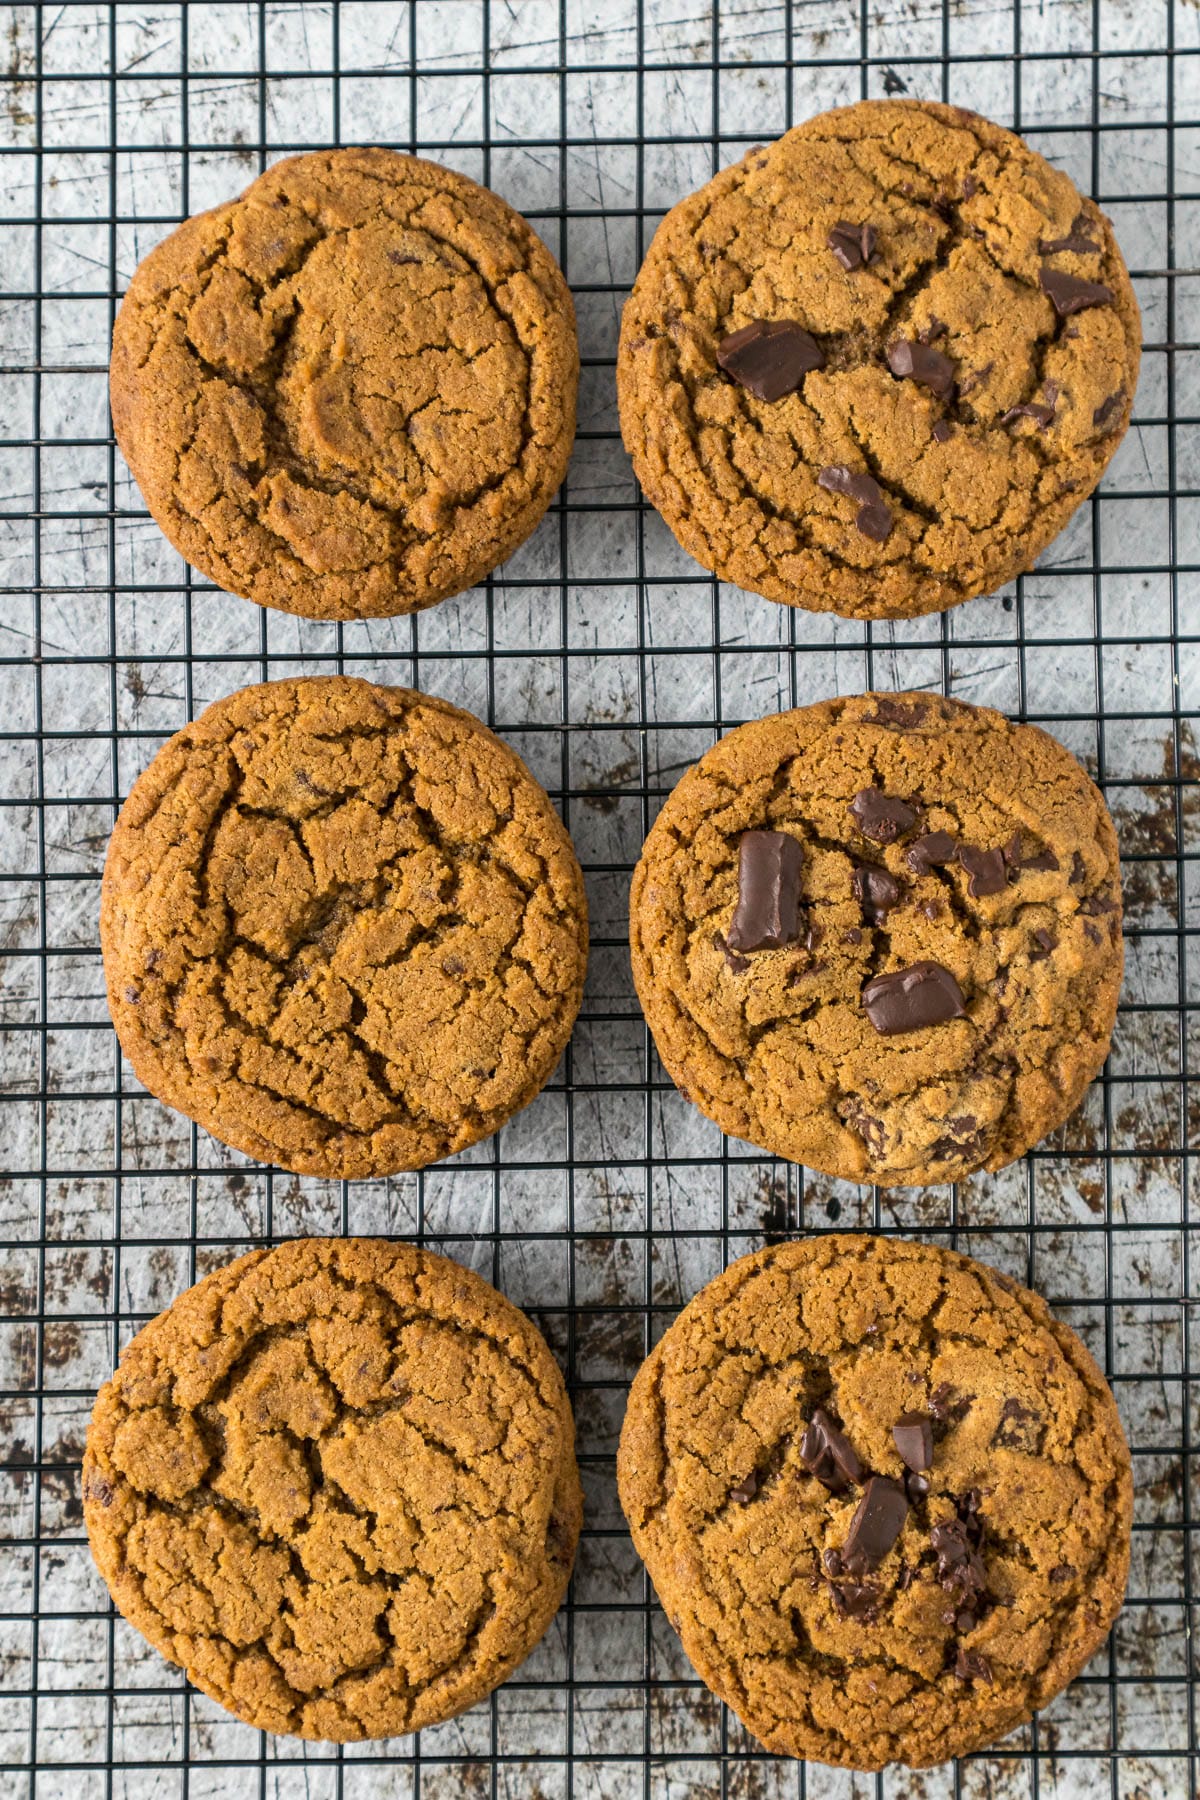 Coffee cookies with and without extra chocolate placed on the top to show the difference in how the final cookie looks.